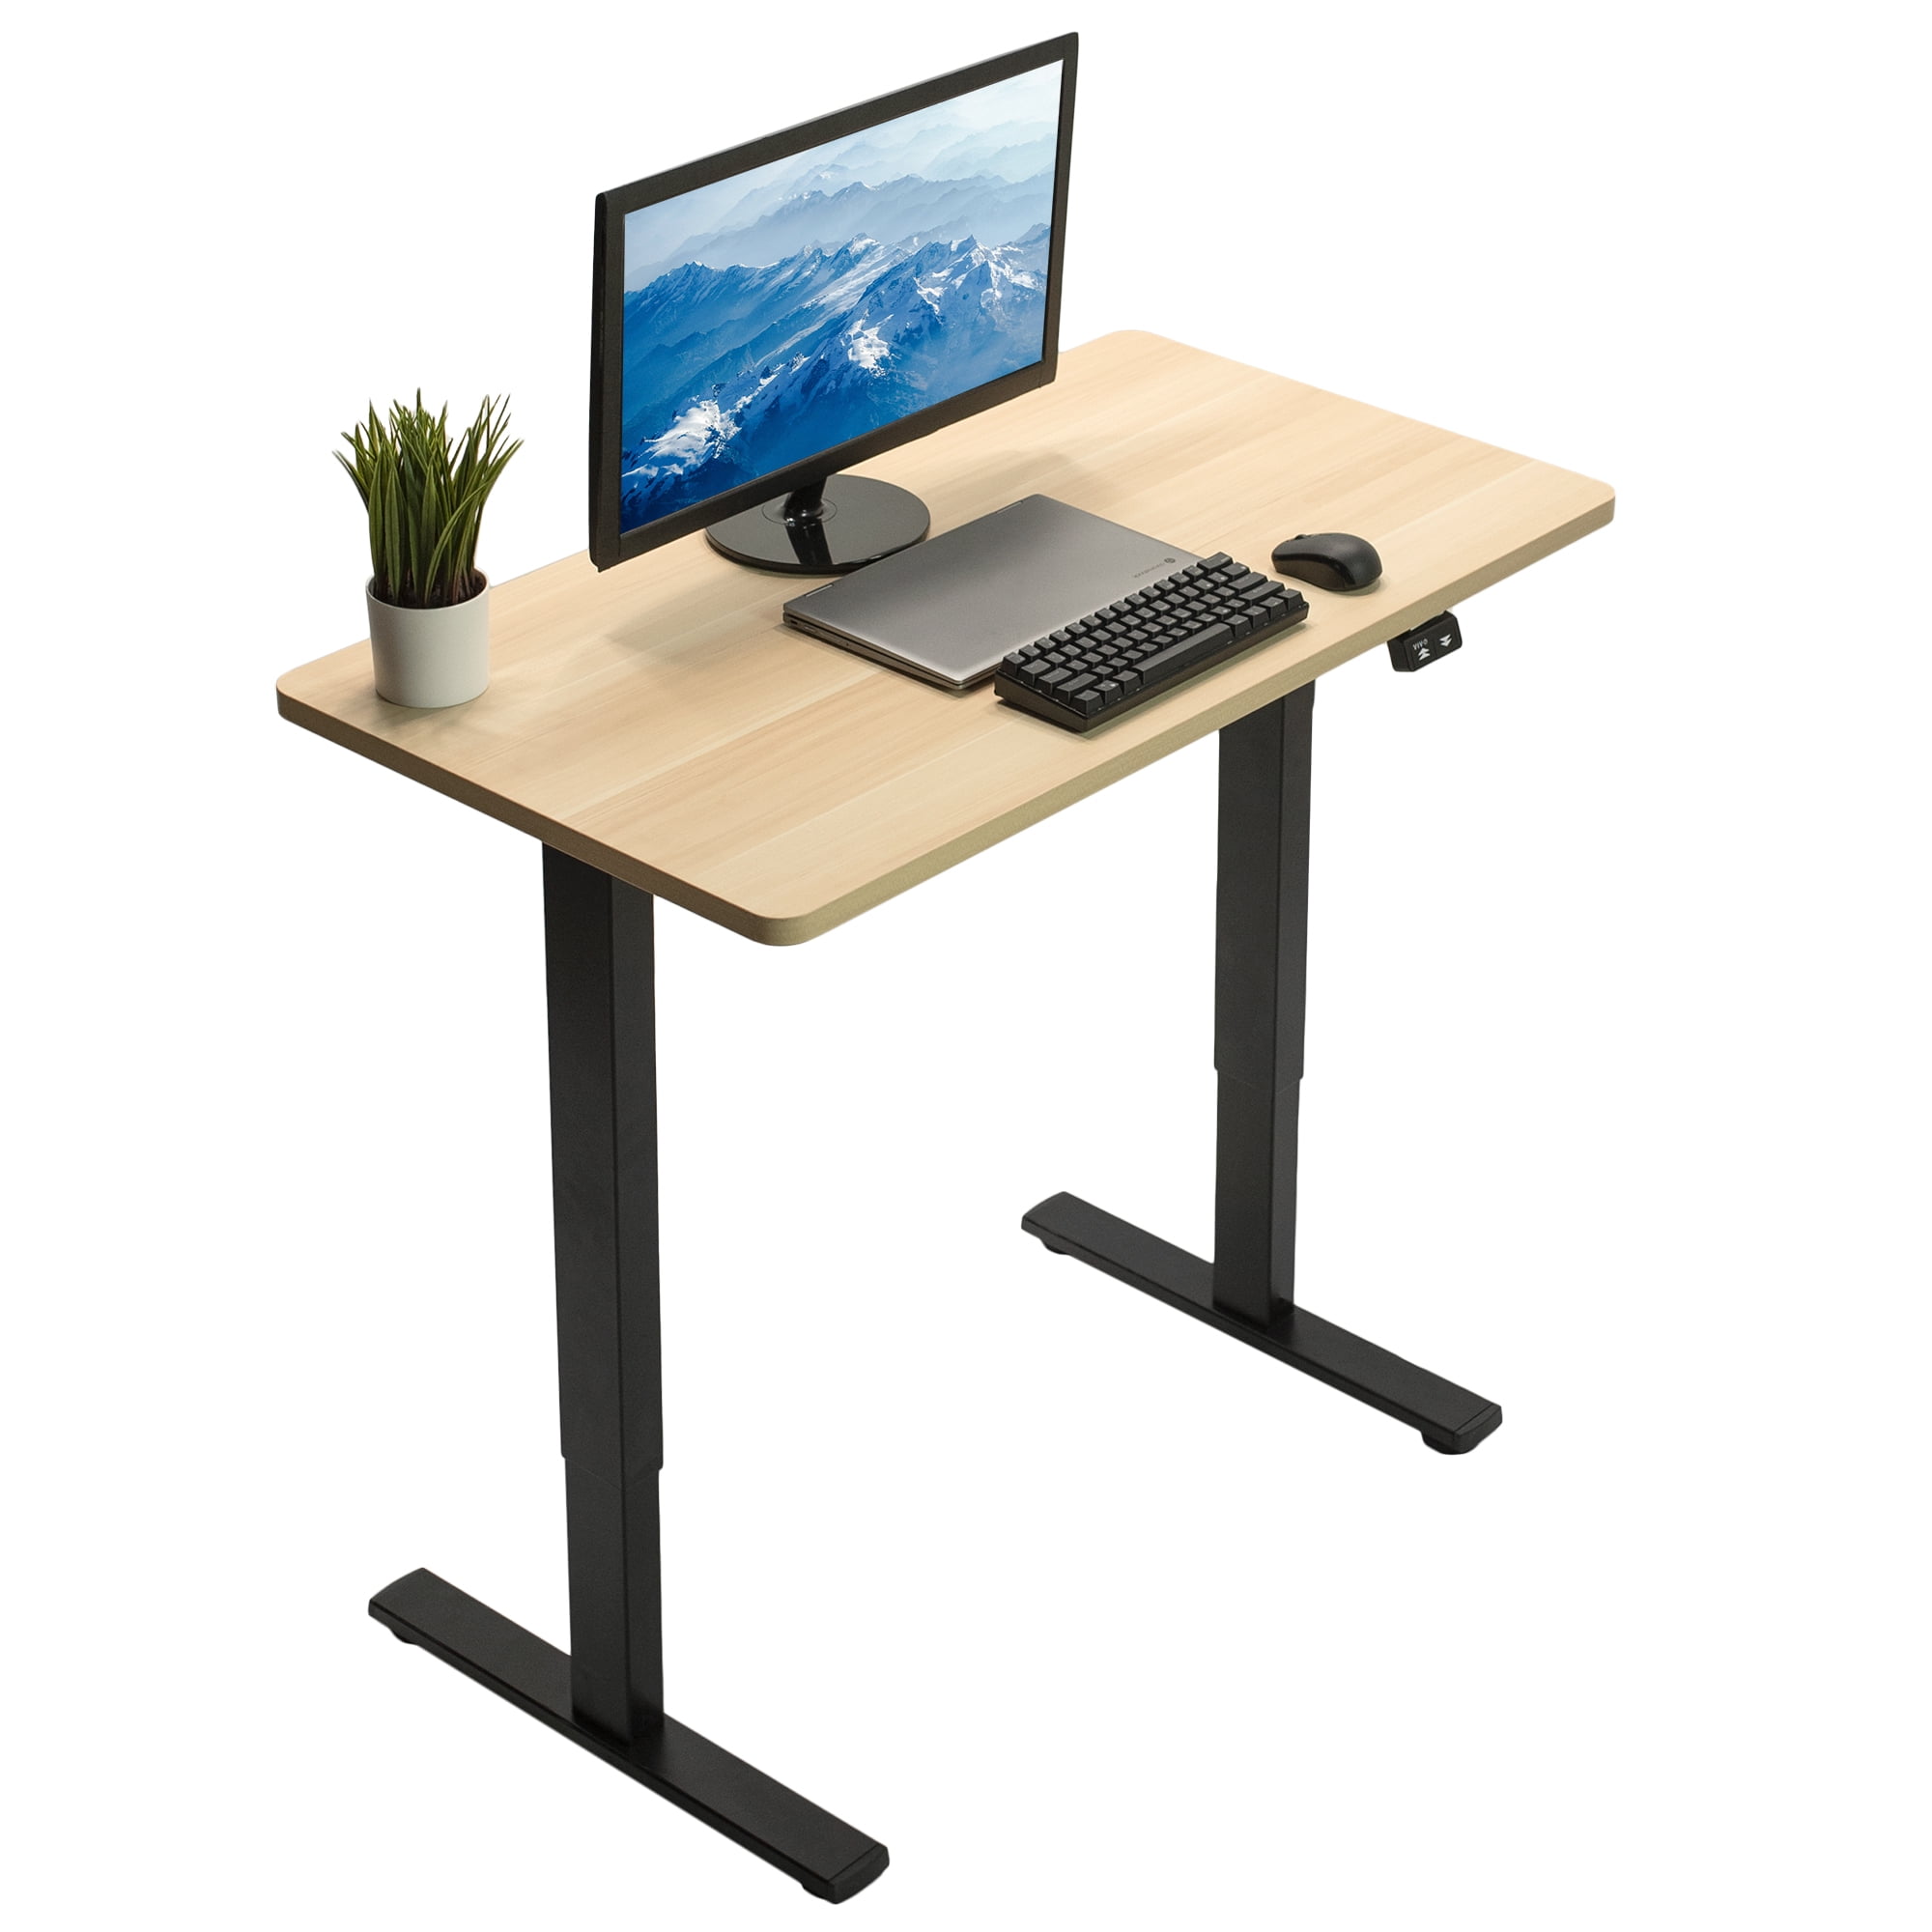 VIVO White Electric 43" x 24" Stand Up Desk Workstation3 Section Table Top 